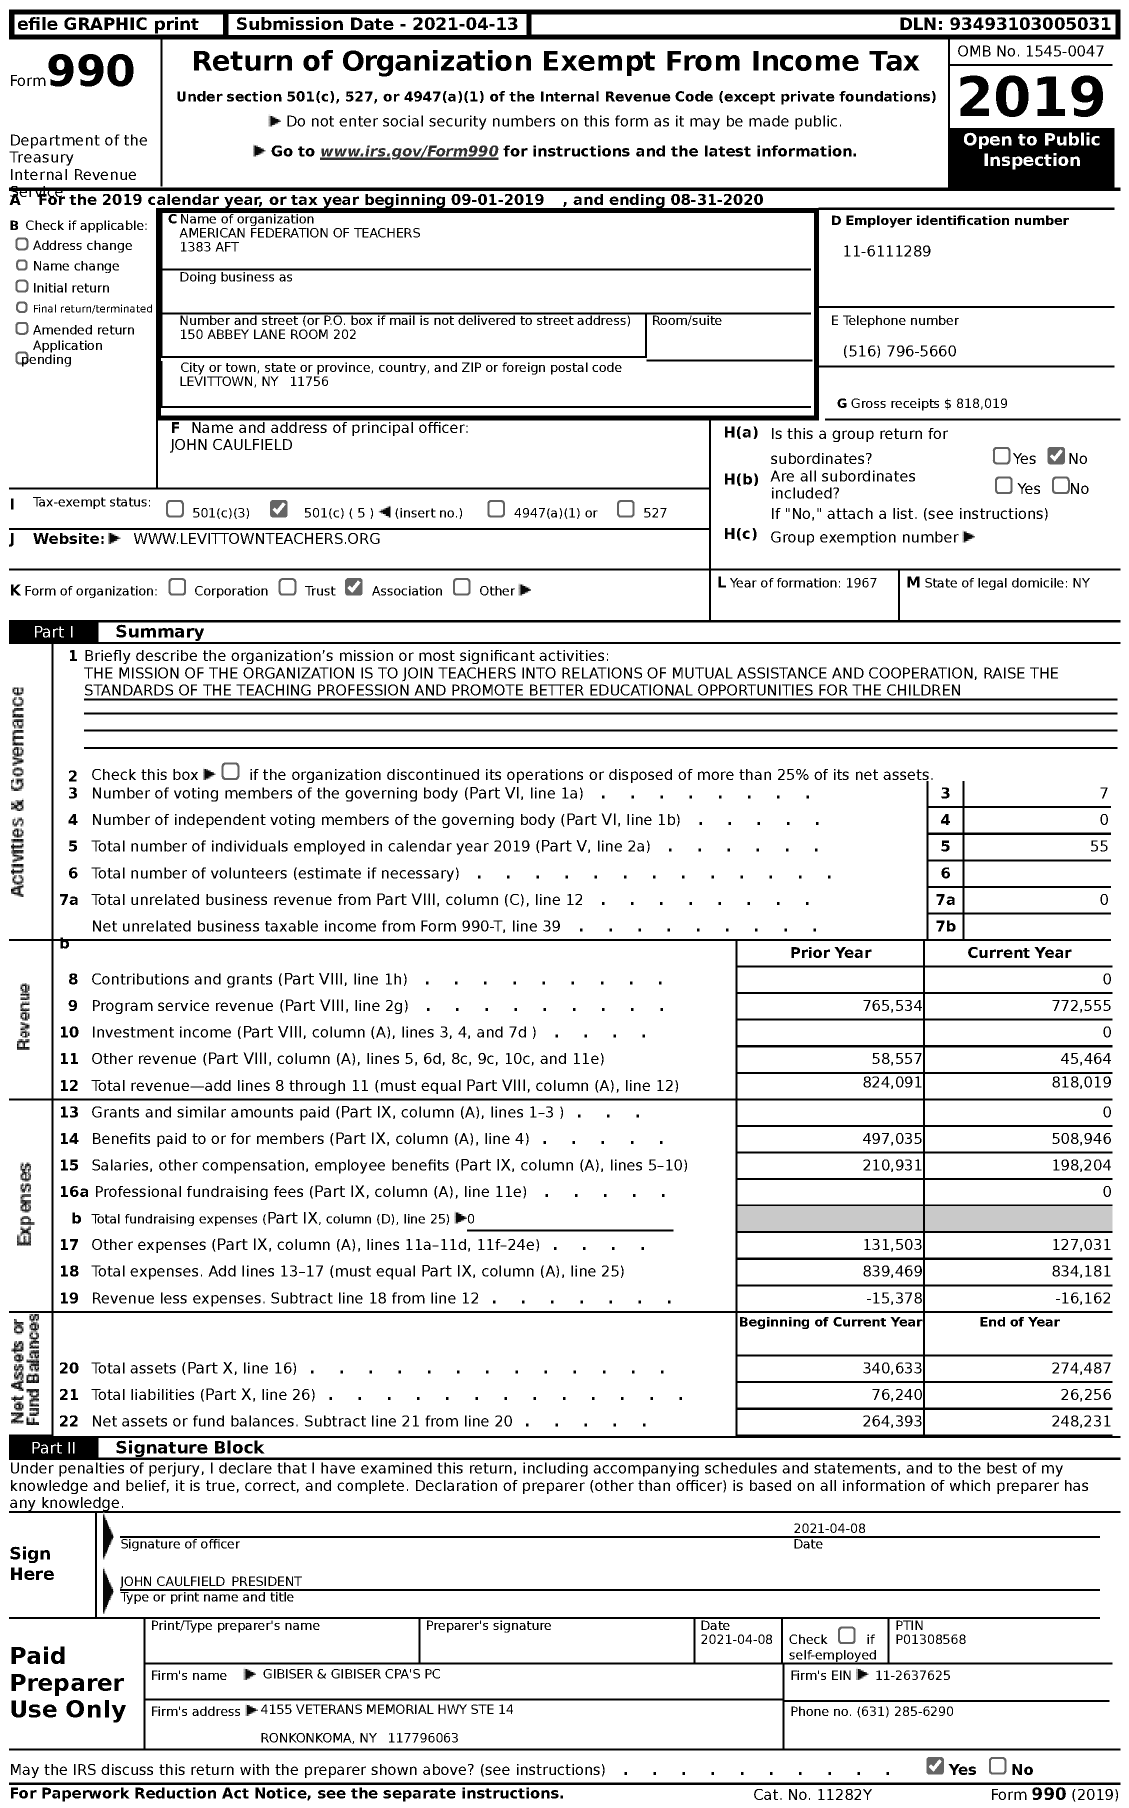 Image of first page of 2019 Form 990 for American Federation of Teachers 1383 (AFT)